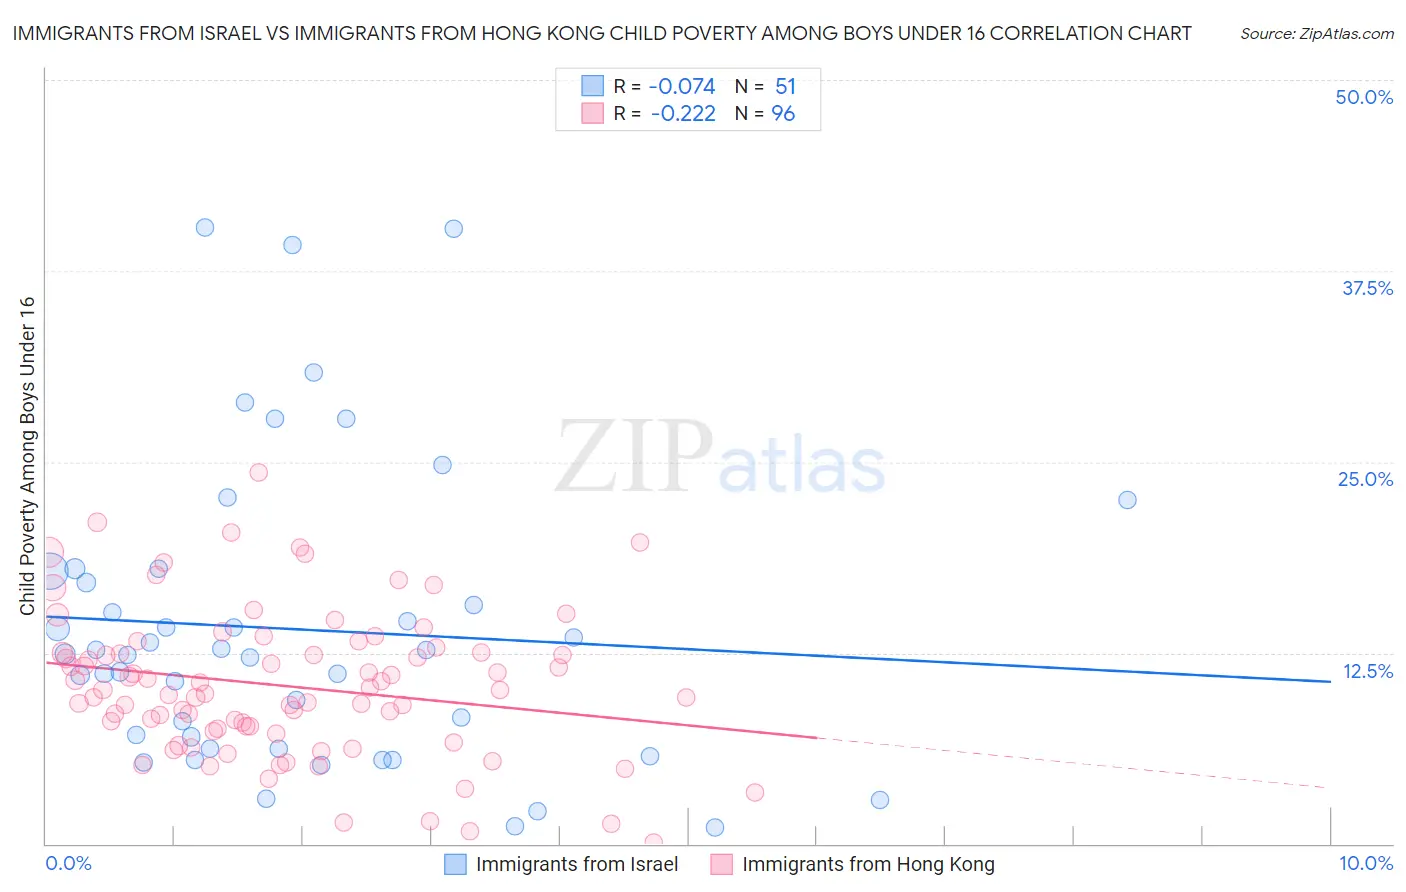 Immigrants from Israel vs Immigrants from Hong Kong Child Poverty Among Boys Under 16